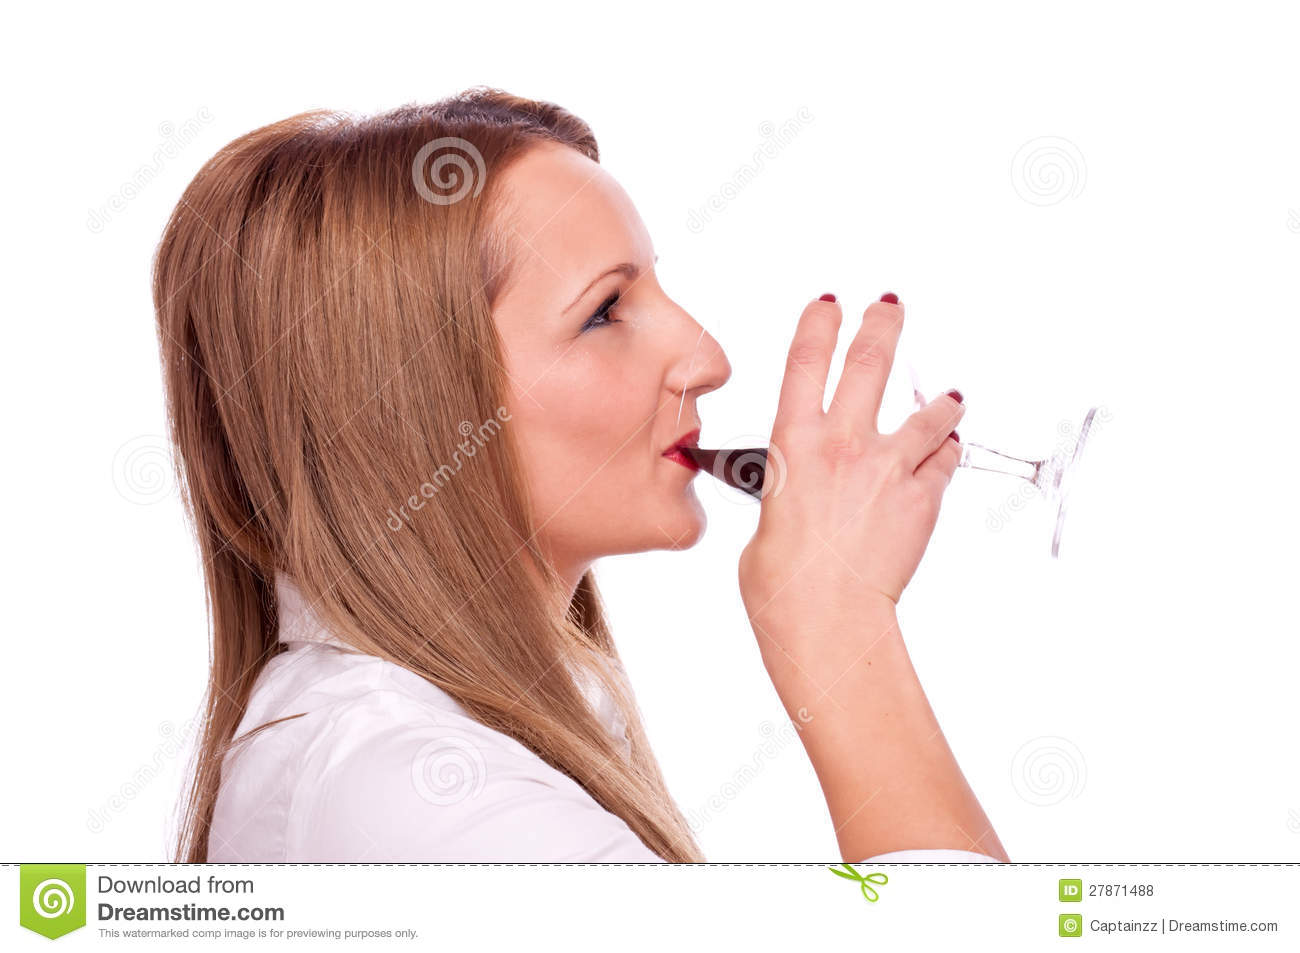 Girl Drinking Red Wine Royalty Free Stock Photos   Image  27871488